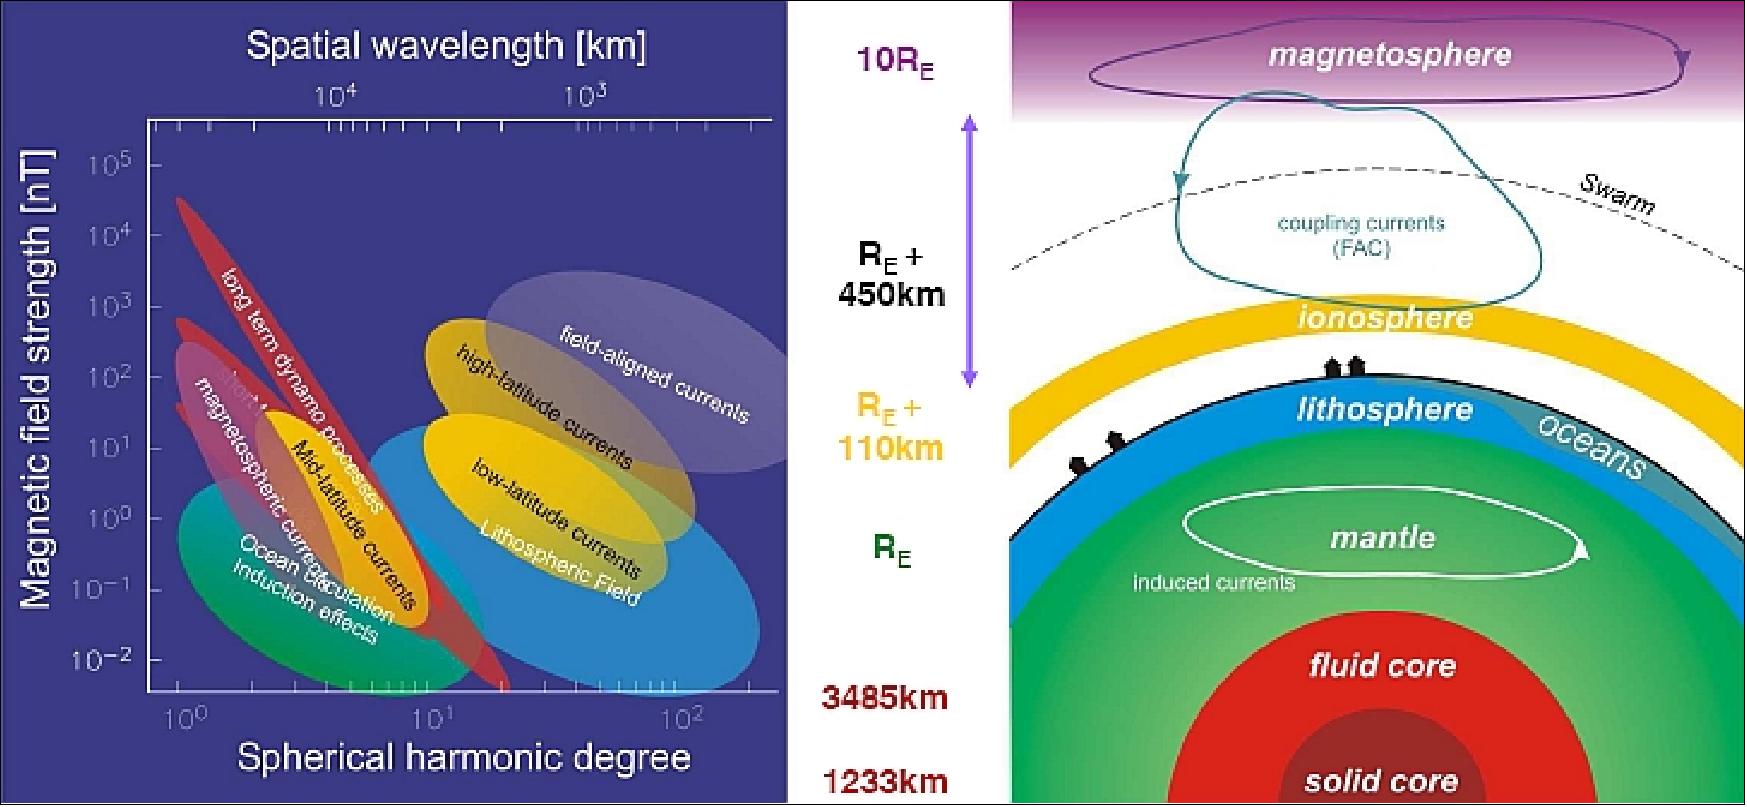 Figure 5: Magnetic field contributions (image credit: ESA) 22)